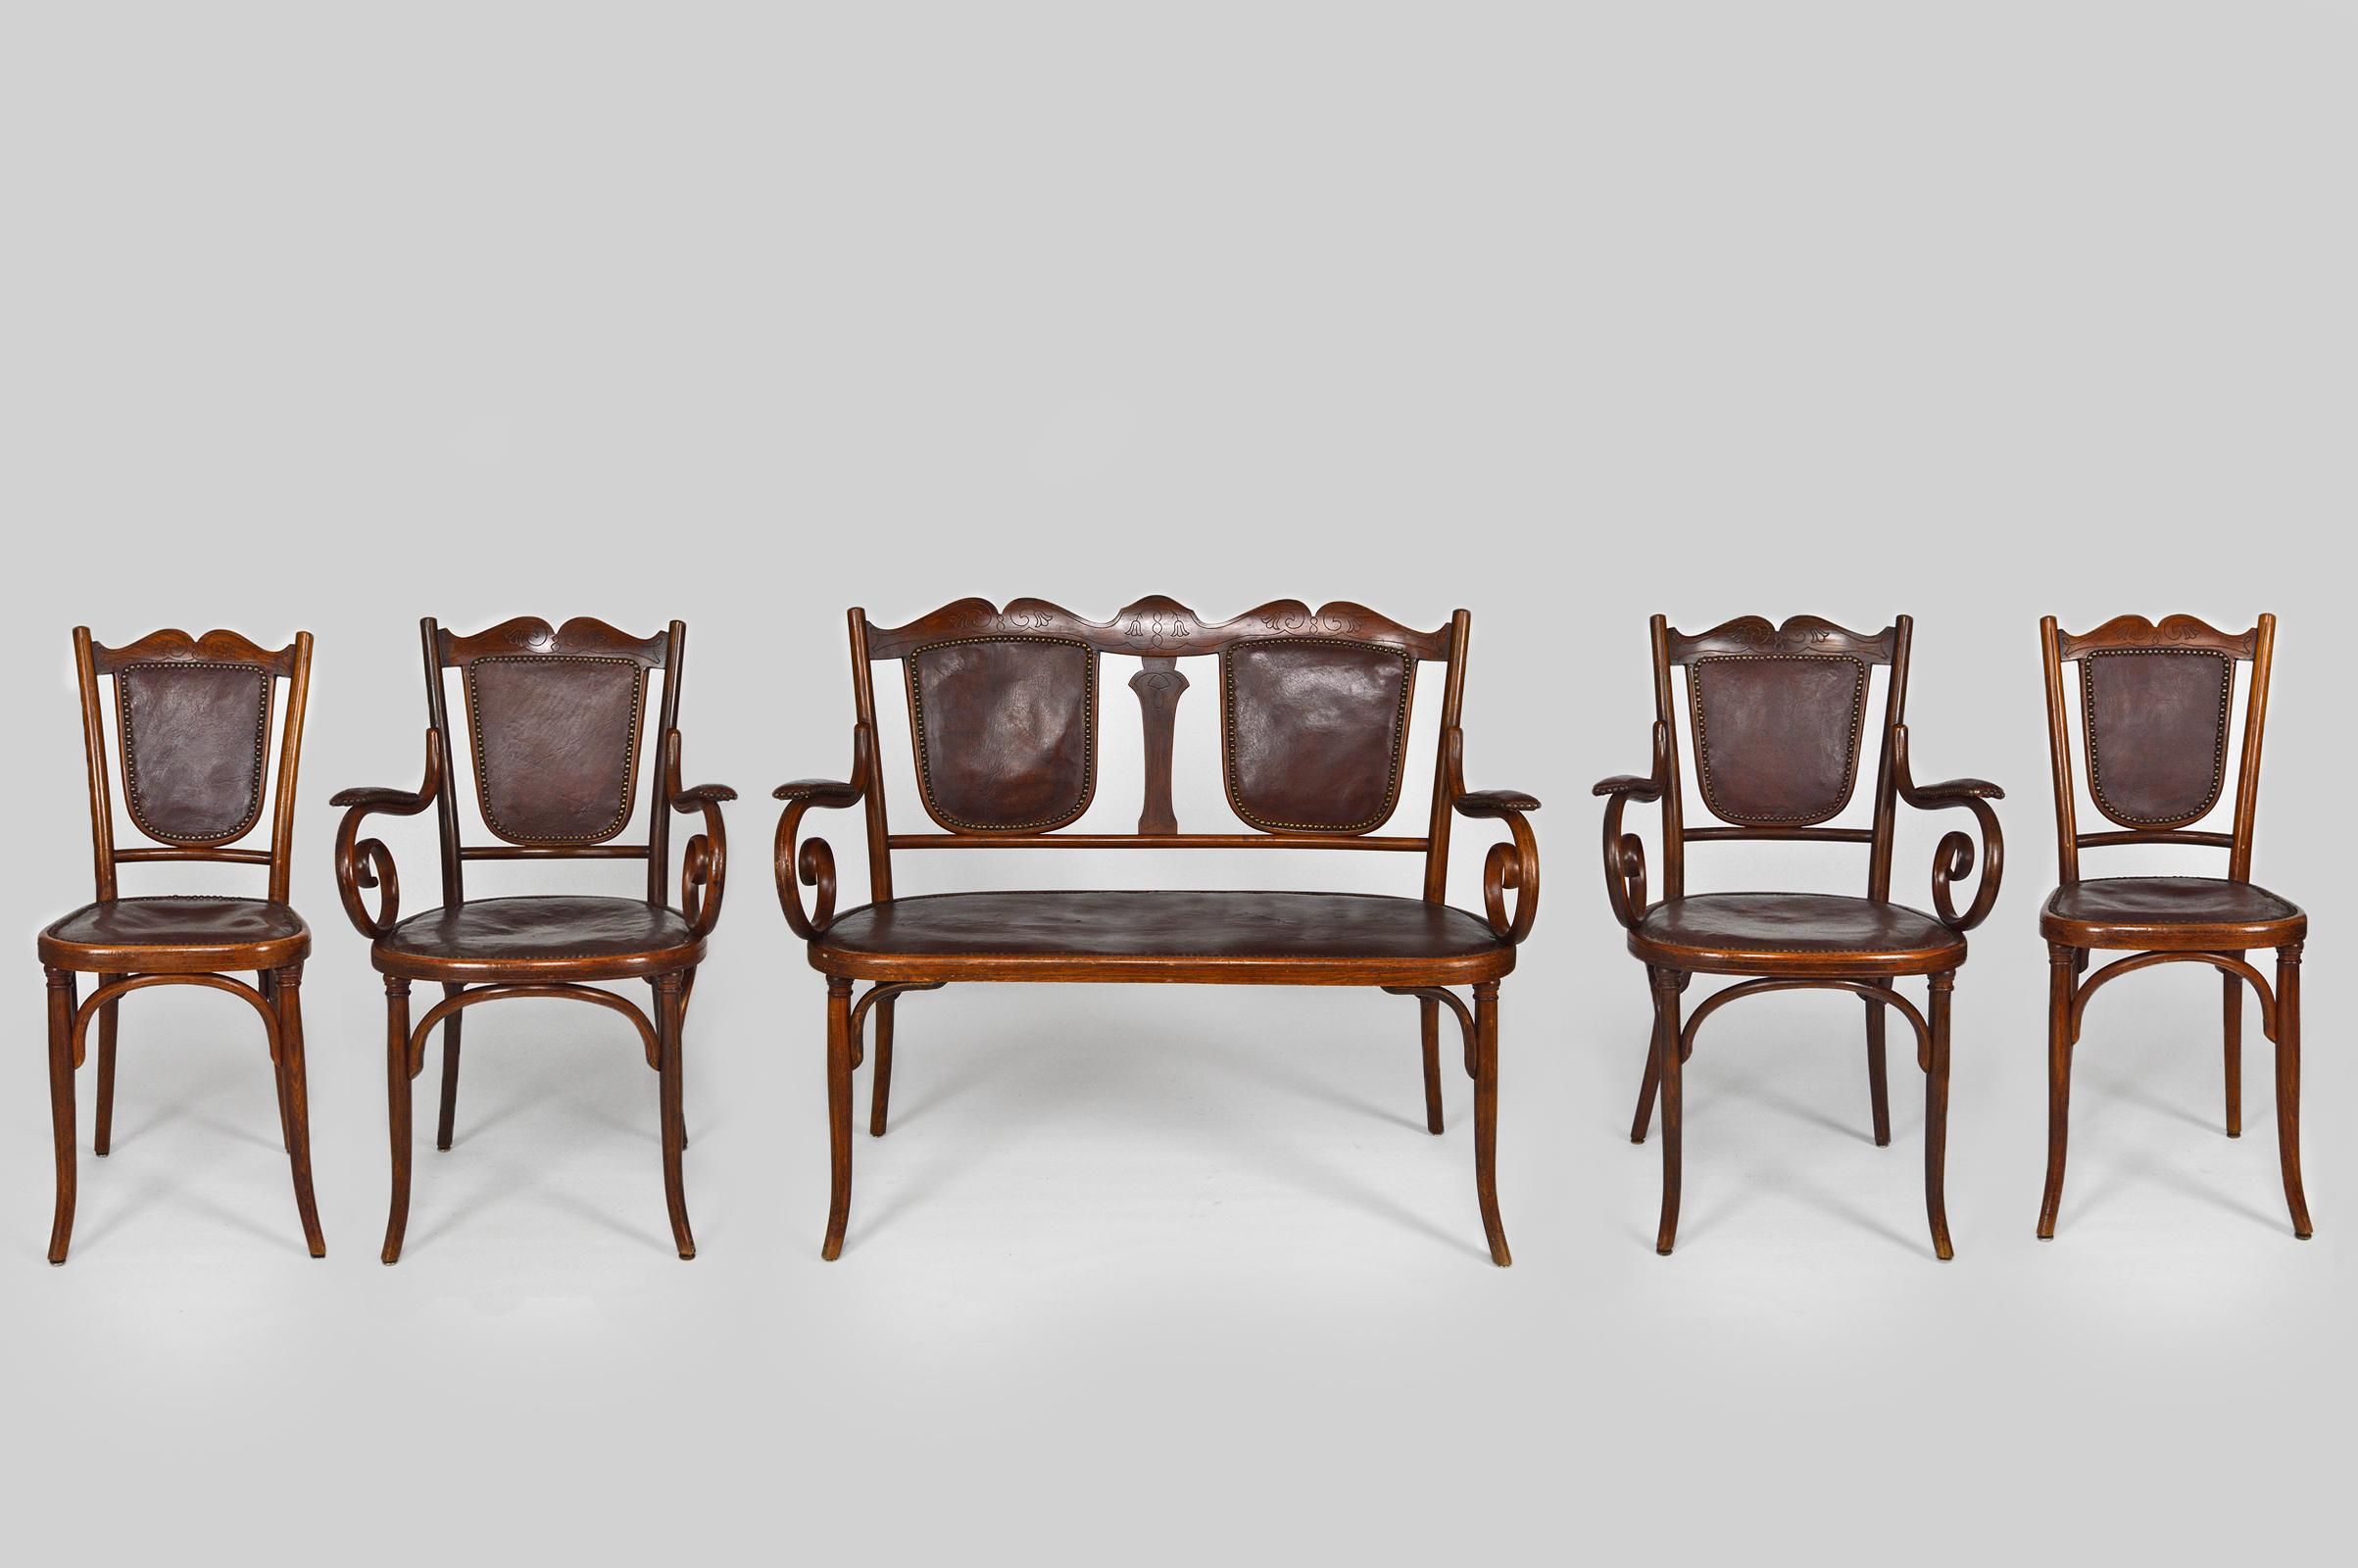 Superb and rare living room set.
In bentwood and leather.
5 pieces: 
-1 sofa / bench / settee
-2 armchairs
-2 chairs

Made by Fischel, circa 1905-1910.
Fischel is with Thonet, Kohn and Mundus one of the leading manufacturers of bentwood